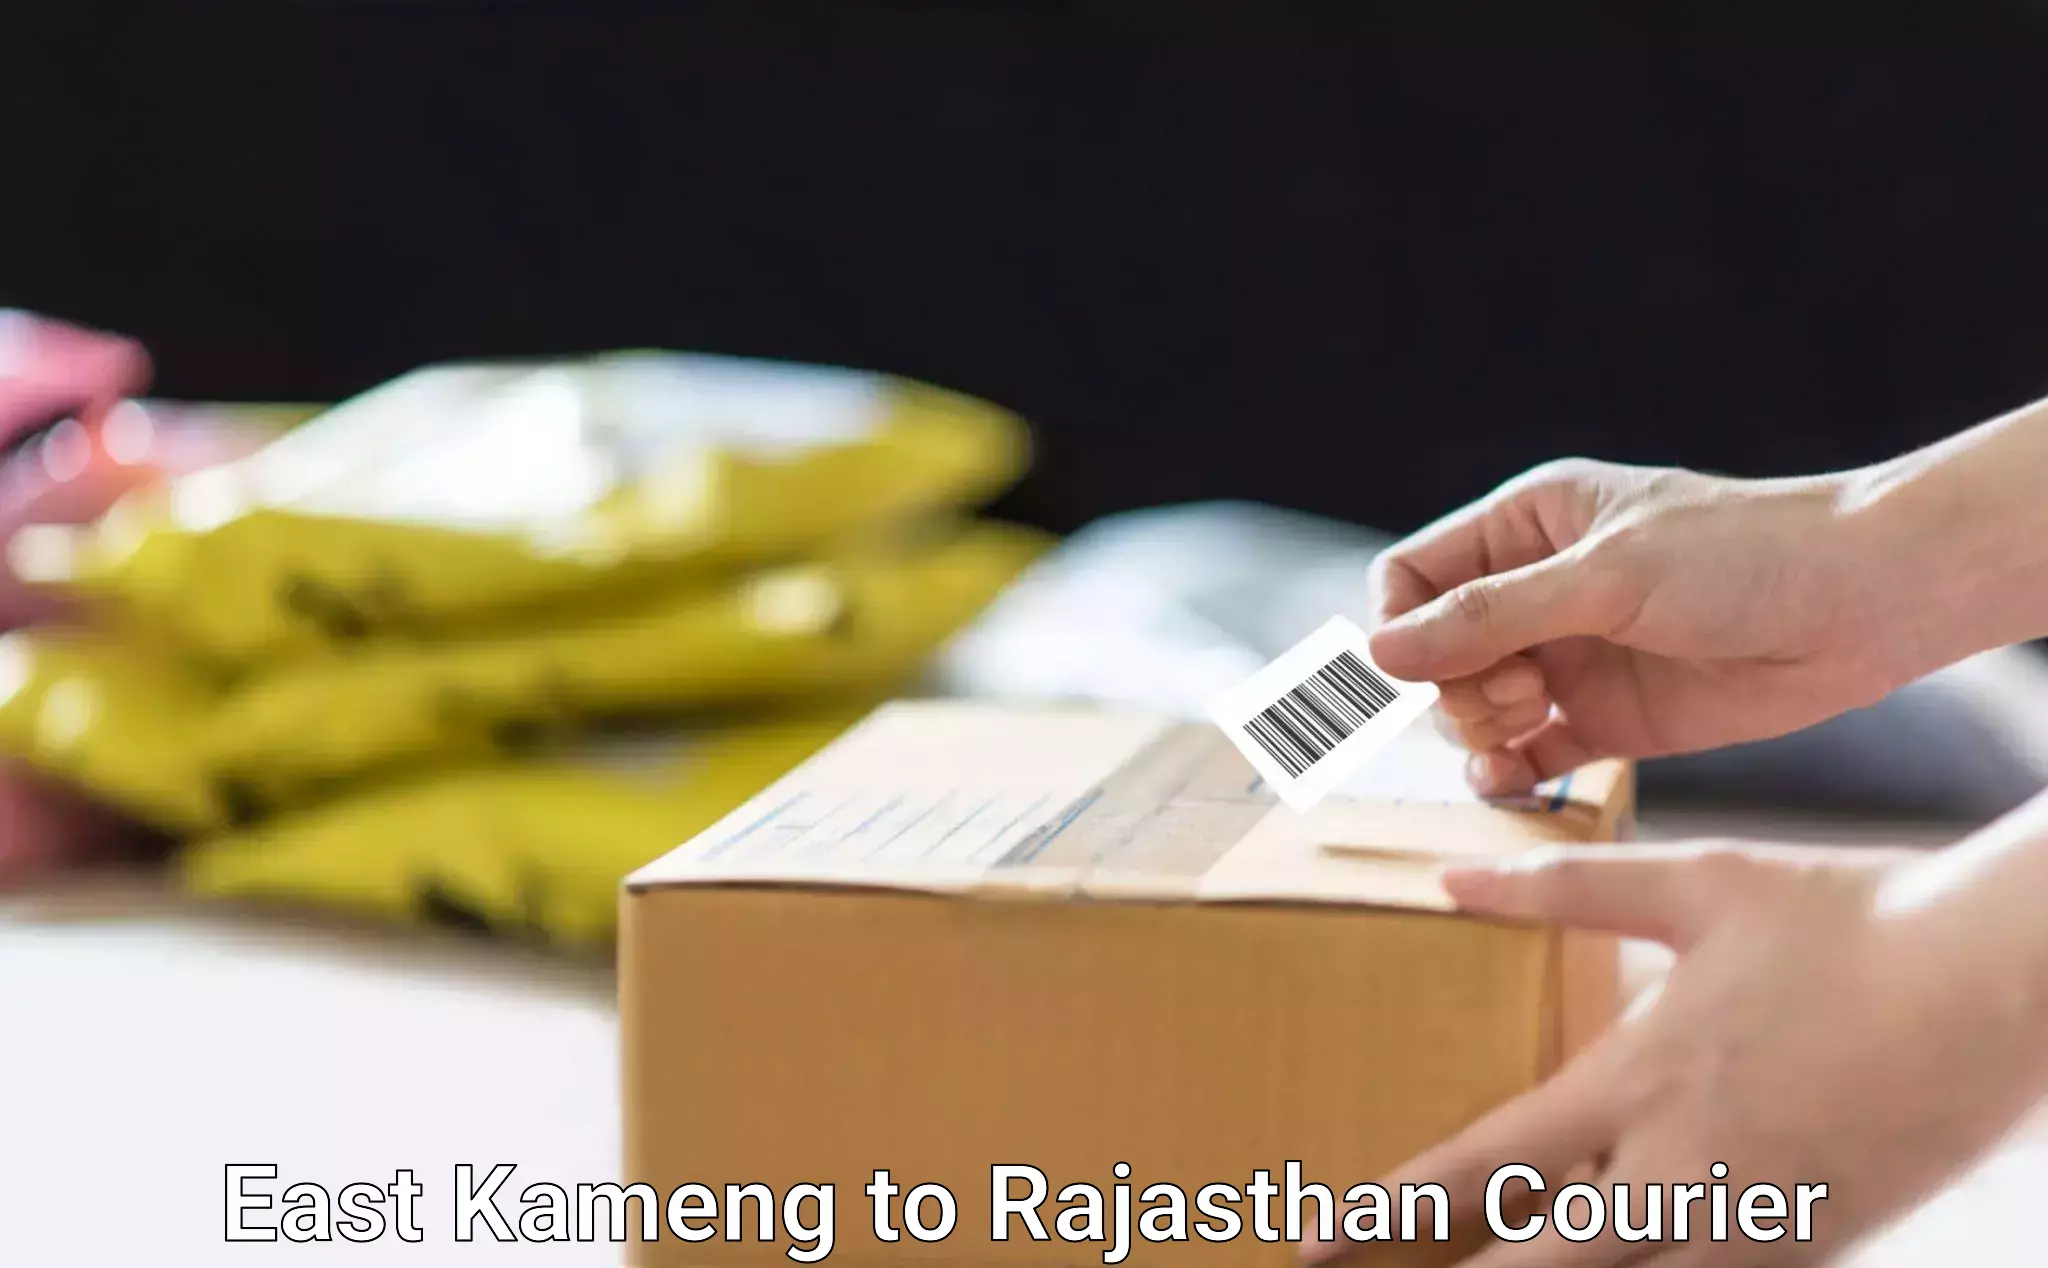 Rapid shipping services East Kameng to Rajasthan